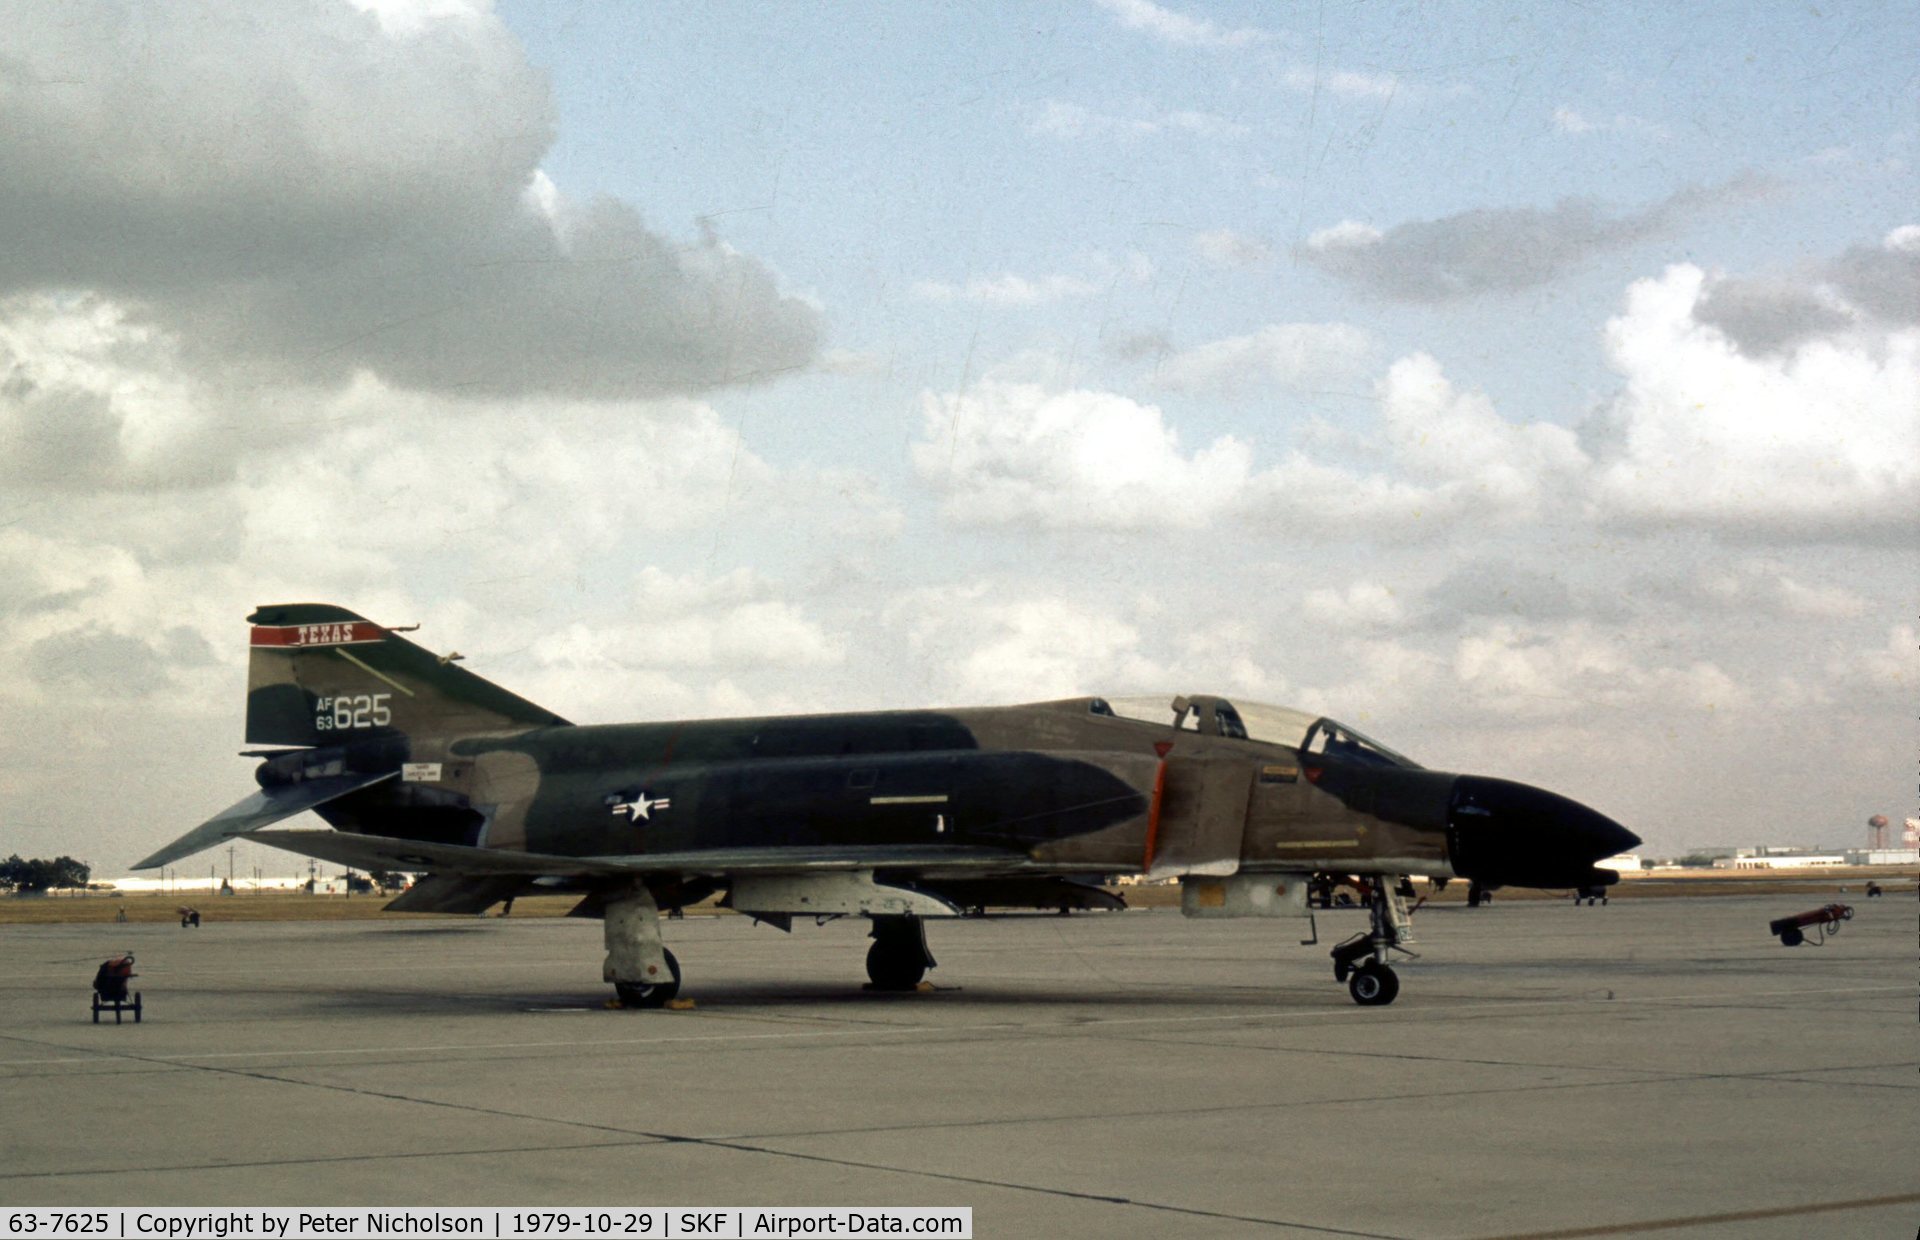 63-7625, 1963 McDonnell F-4C Phantom II C/N 713, F-4C Phantom of 182nd Tactical Fighter Squadron/149th Tactical Fighter Group seen at Kelly AFB in October 1979.